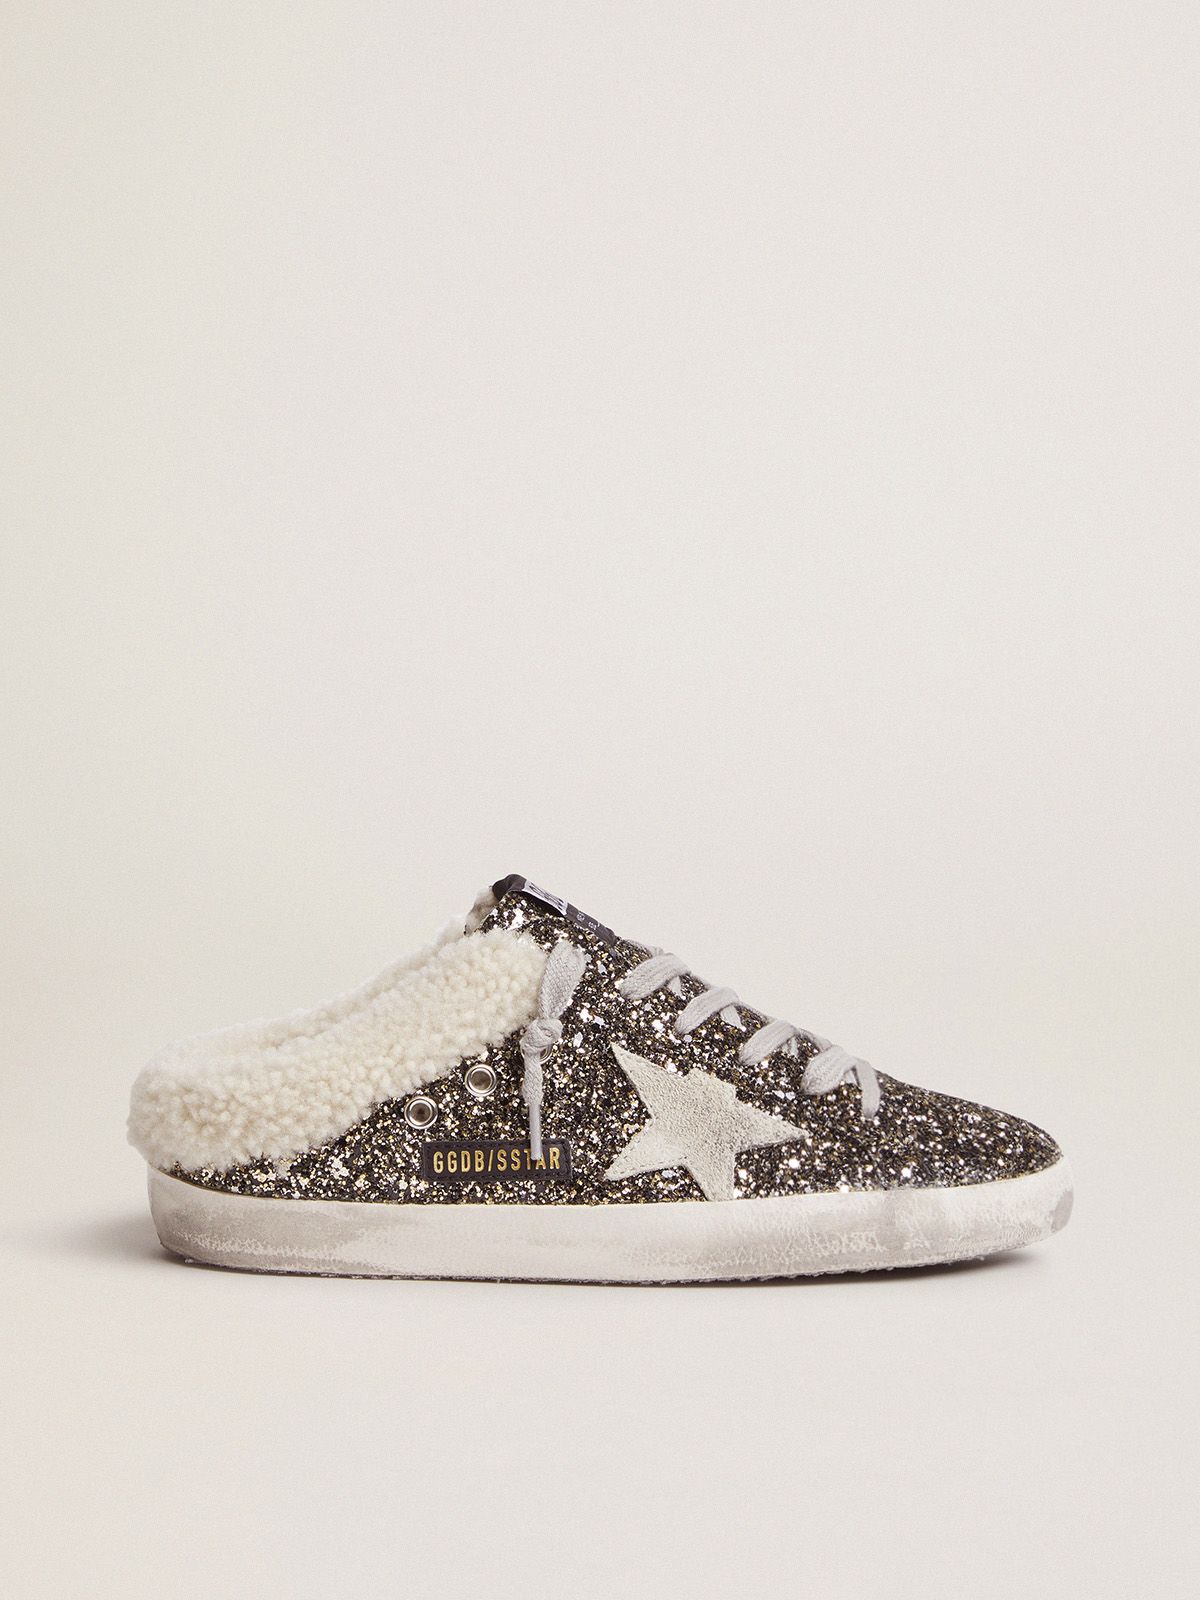 Sneakers Uomo Golden Goose Super-Star sabot-style sneakers with glitter and shearling lining